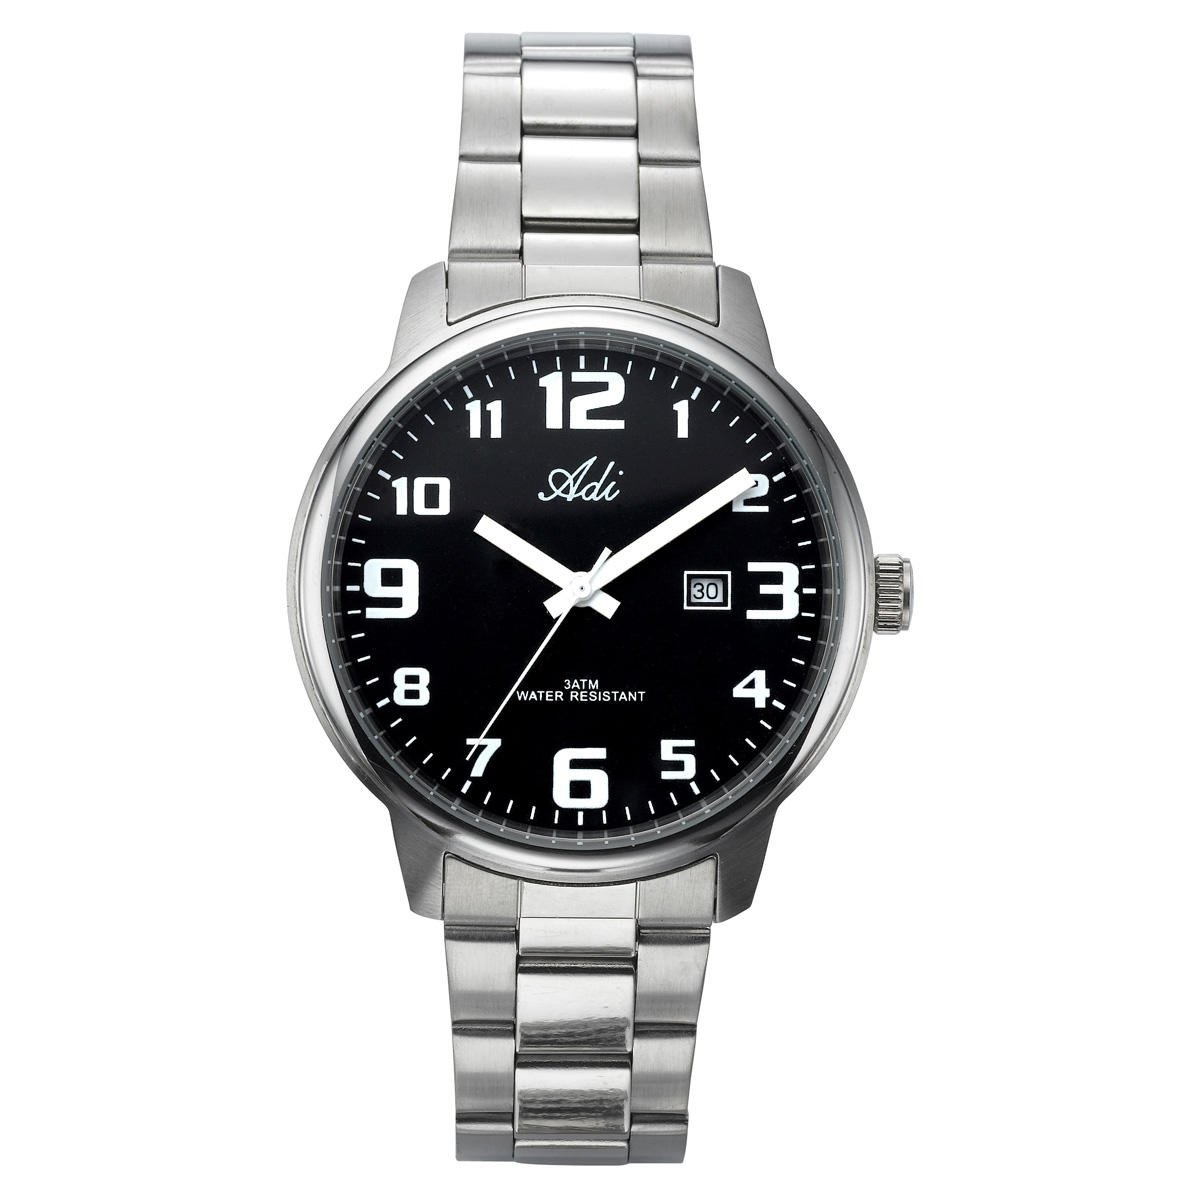 Adi Deluxe Large-Faced Men's Stainless Steel Watch   - 1